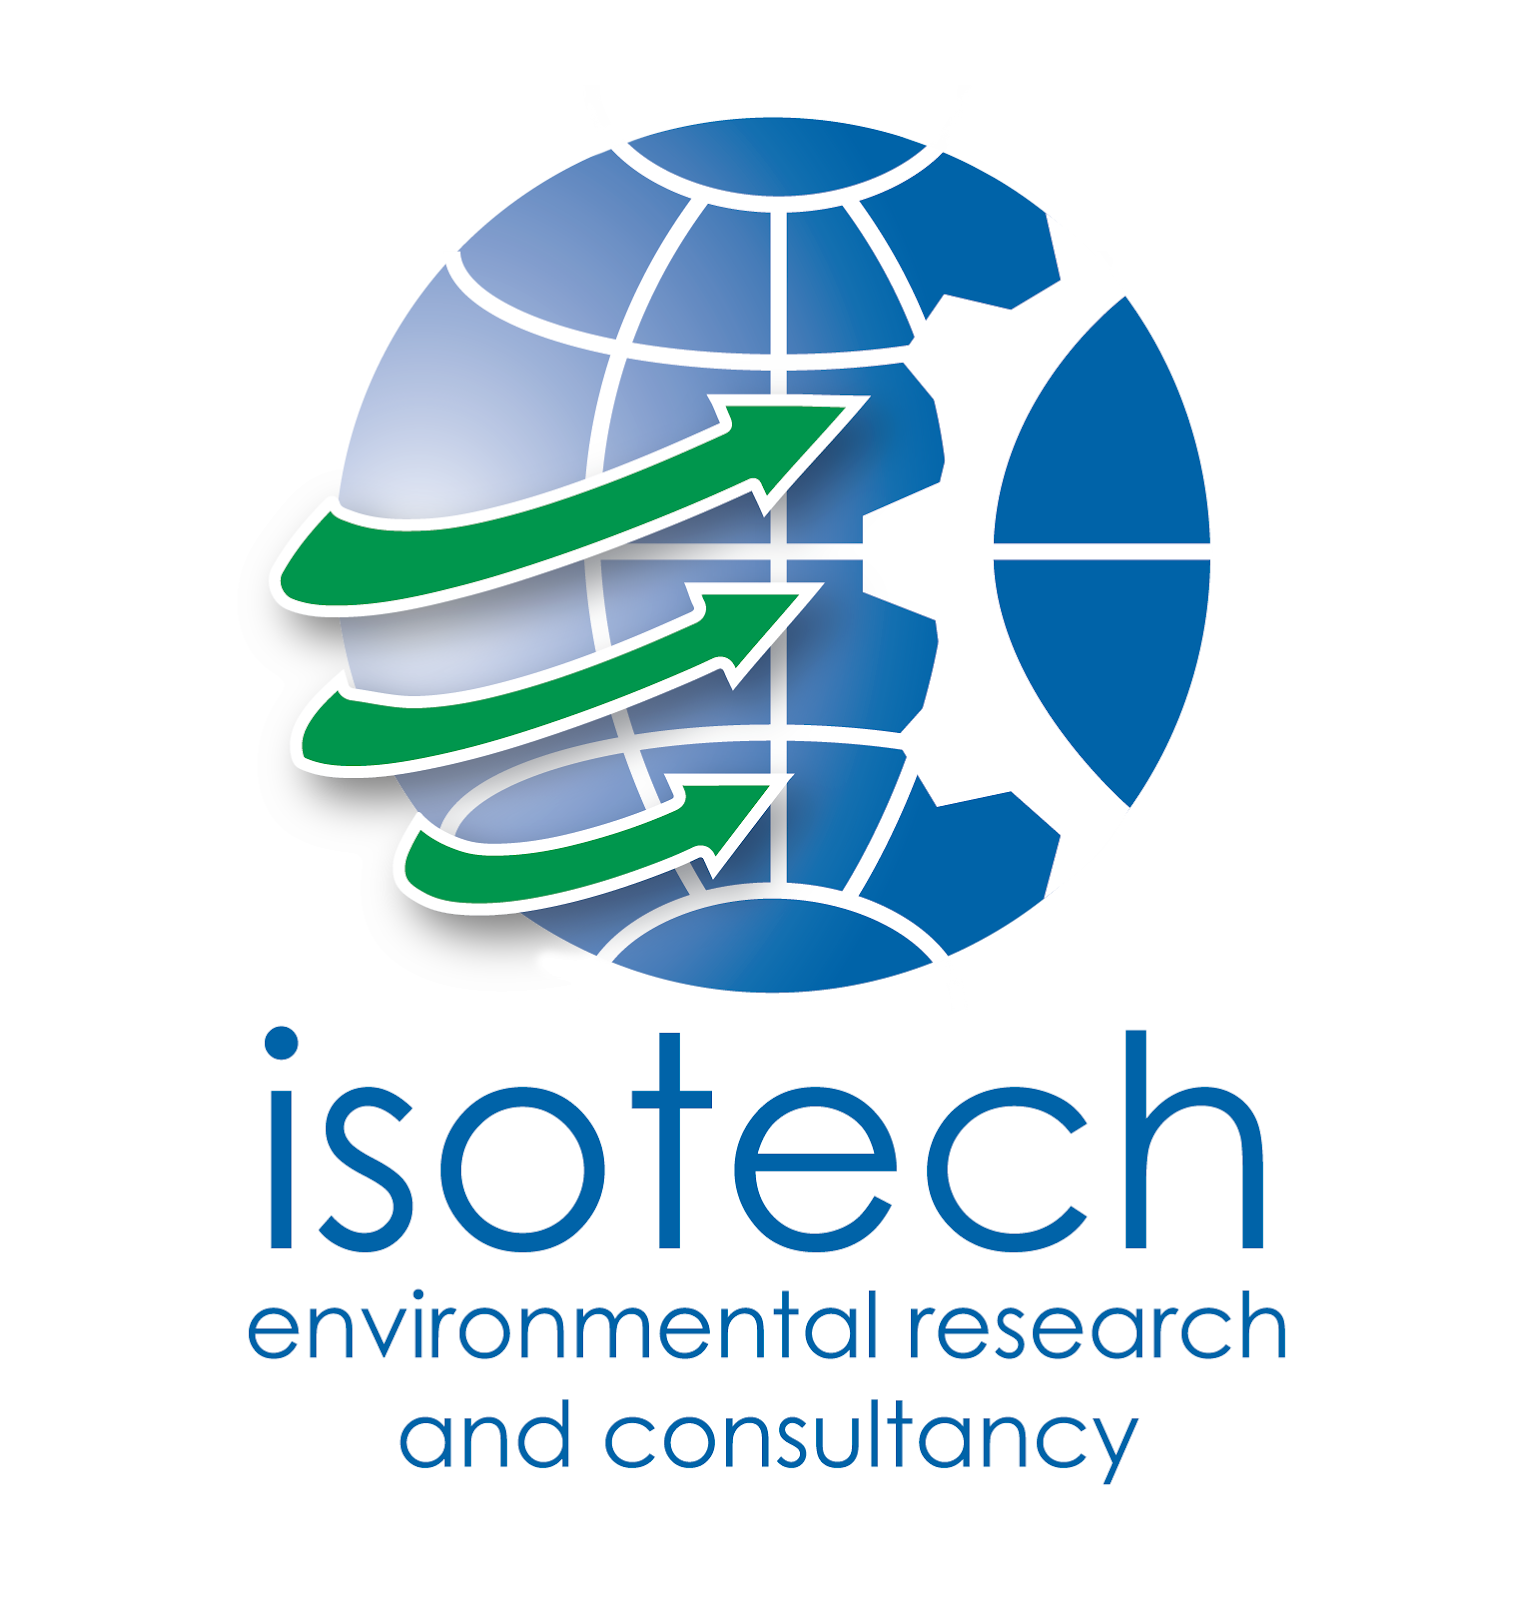 isotech